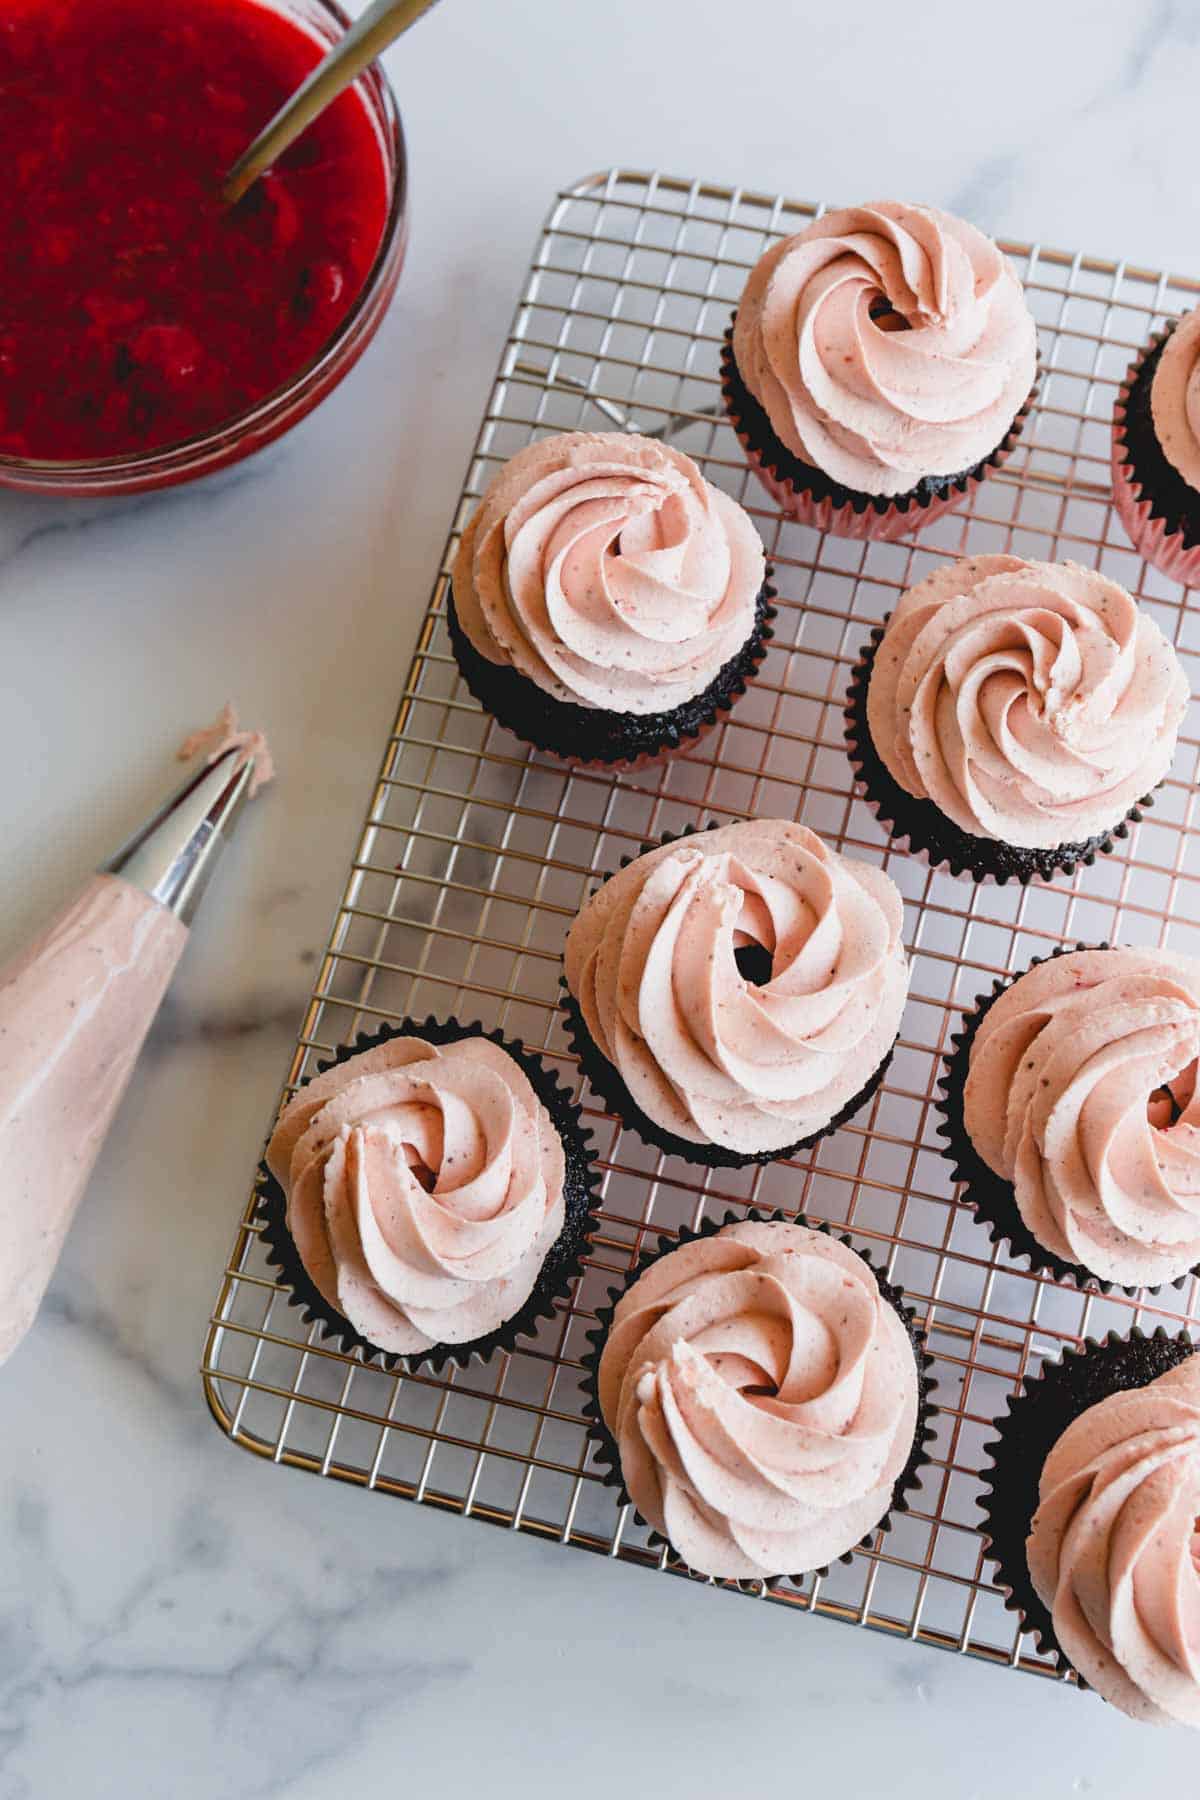 Strawberry chocolate cupcakes topped with strawberry whipped cream frosting on a wire rack.